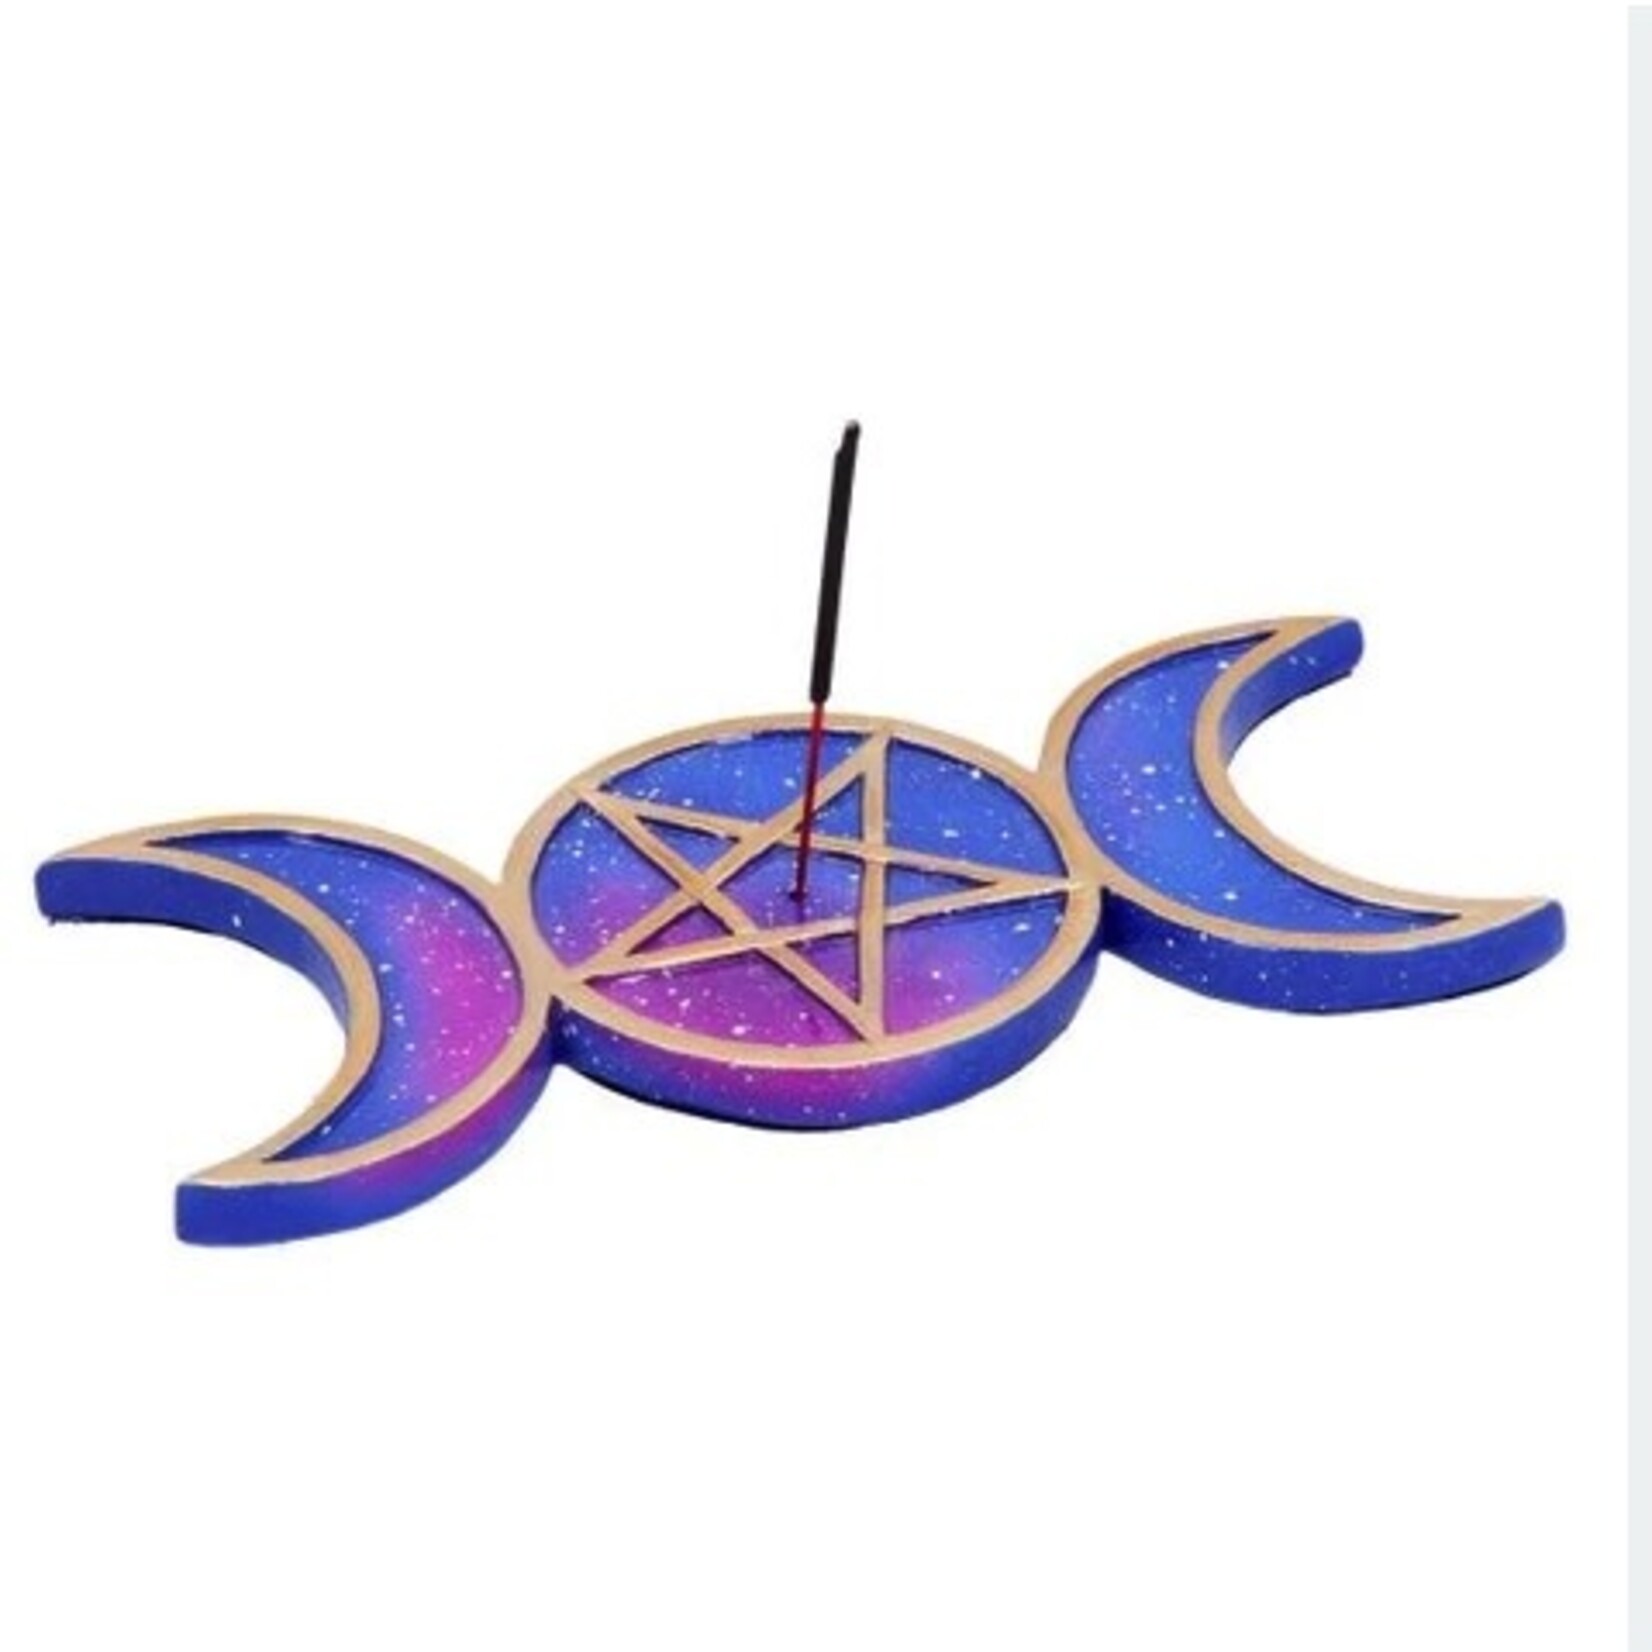 Faire Pentagram and Moon Galaxy Incense Plate